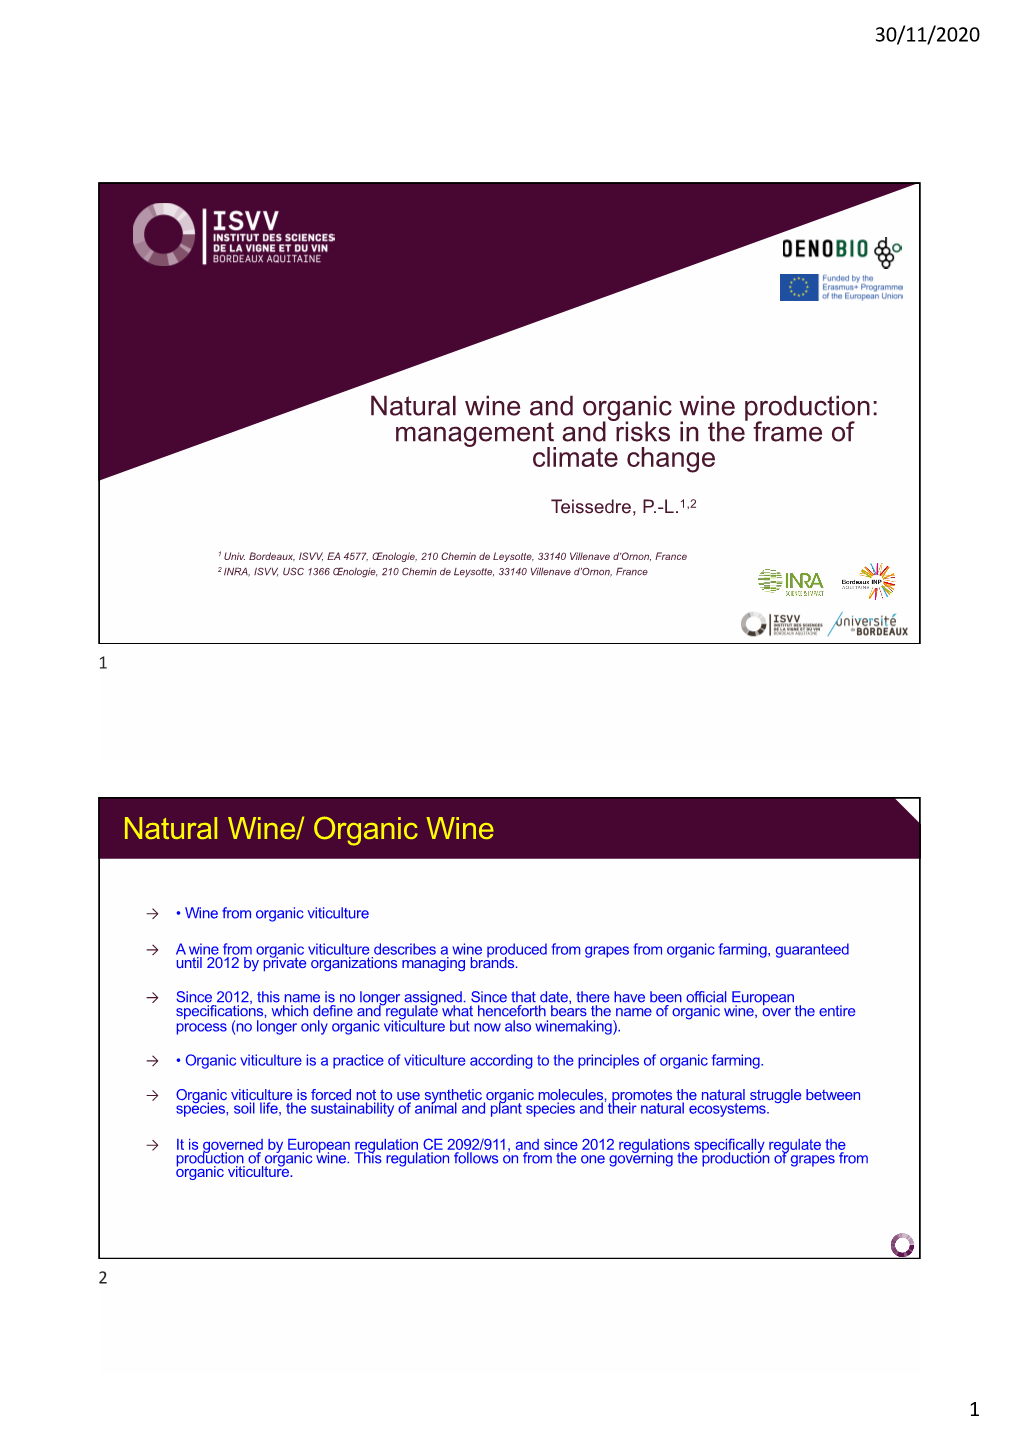 Natural Wine and Organic Wine Production: Management and Risks in the Frame of Climate Change